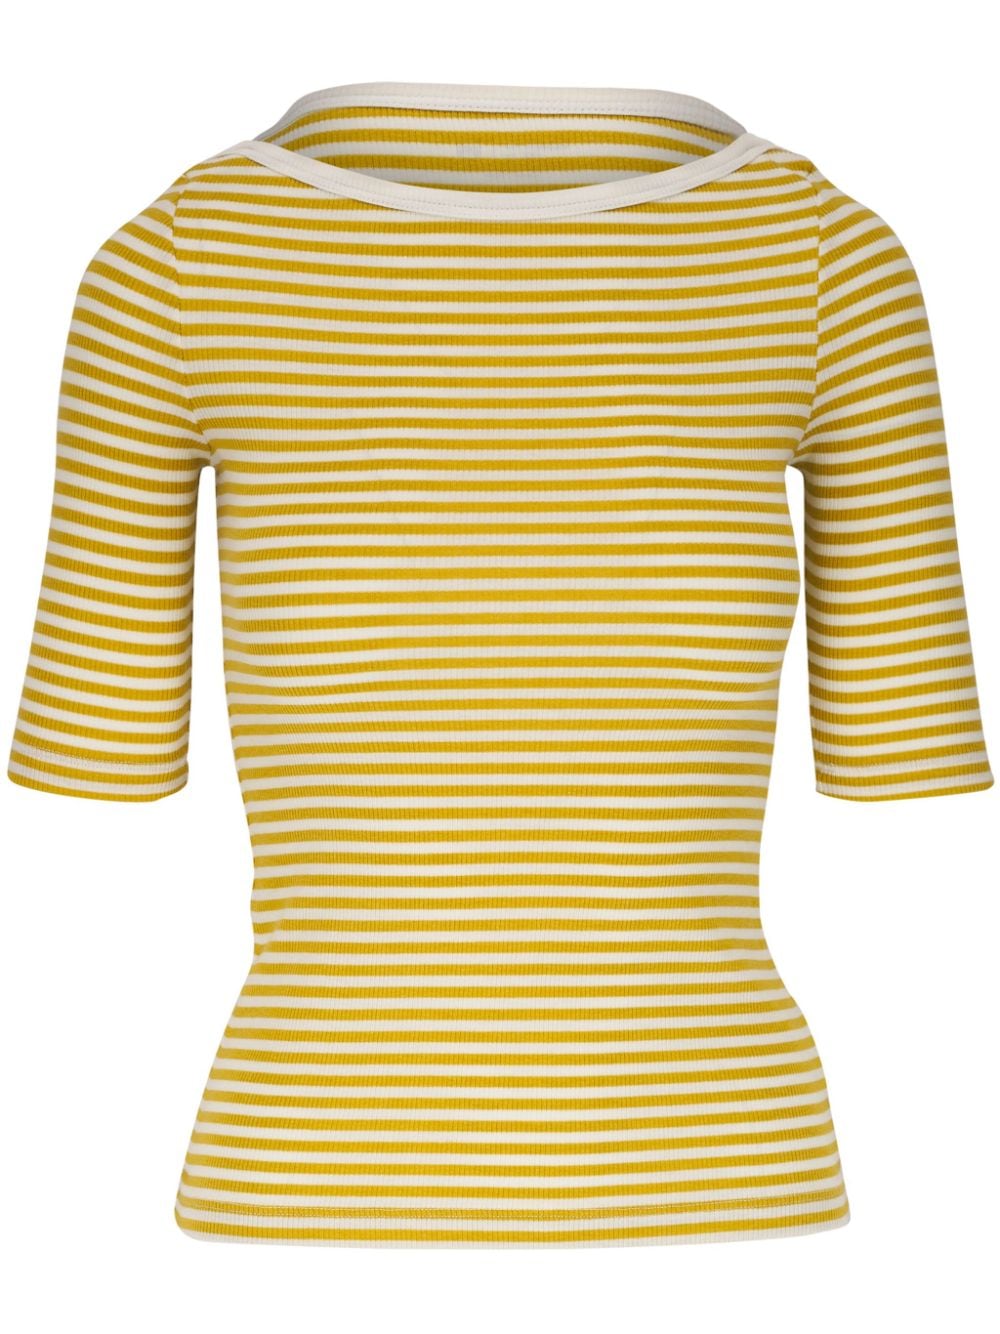 AG Jeans striped ribbed-knit top - Yellow von AG Jeans